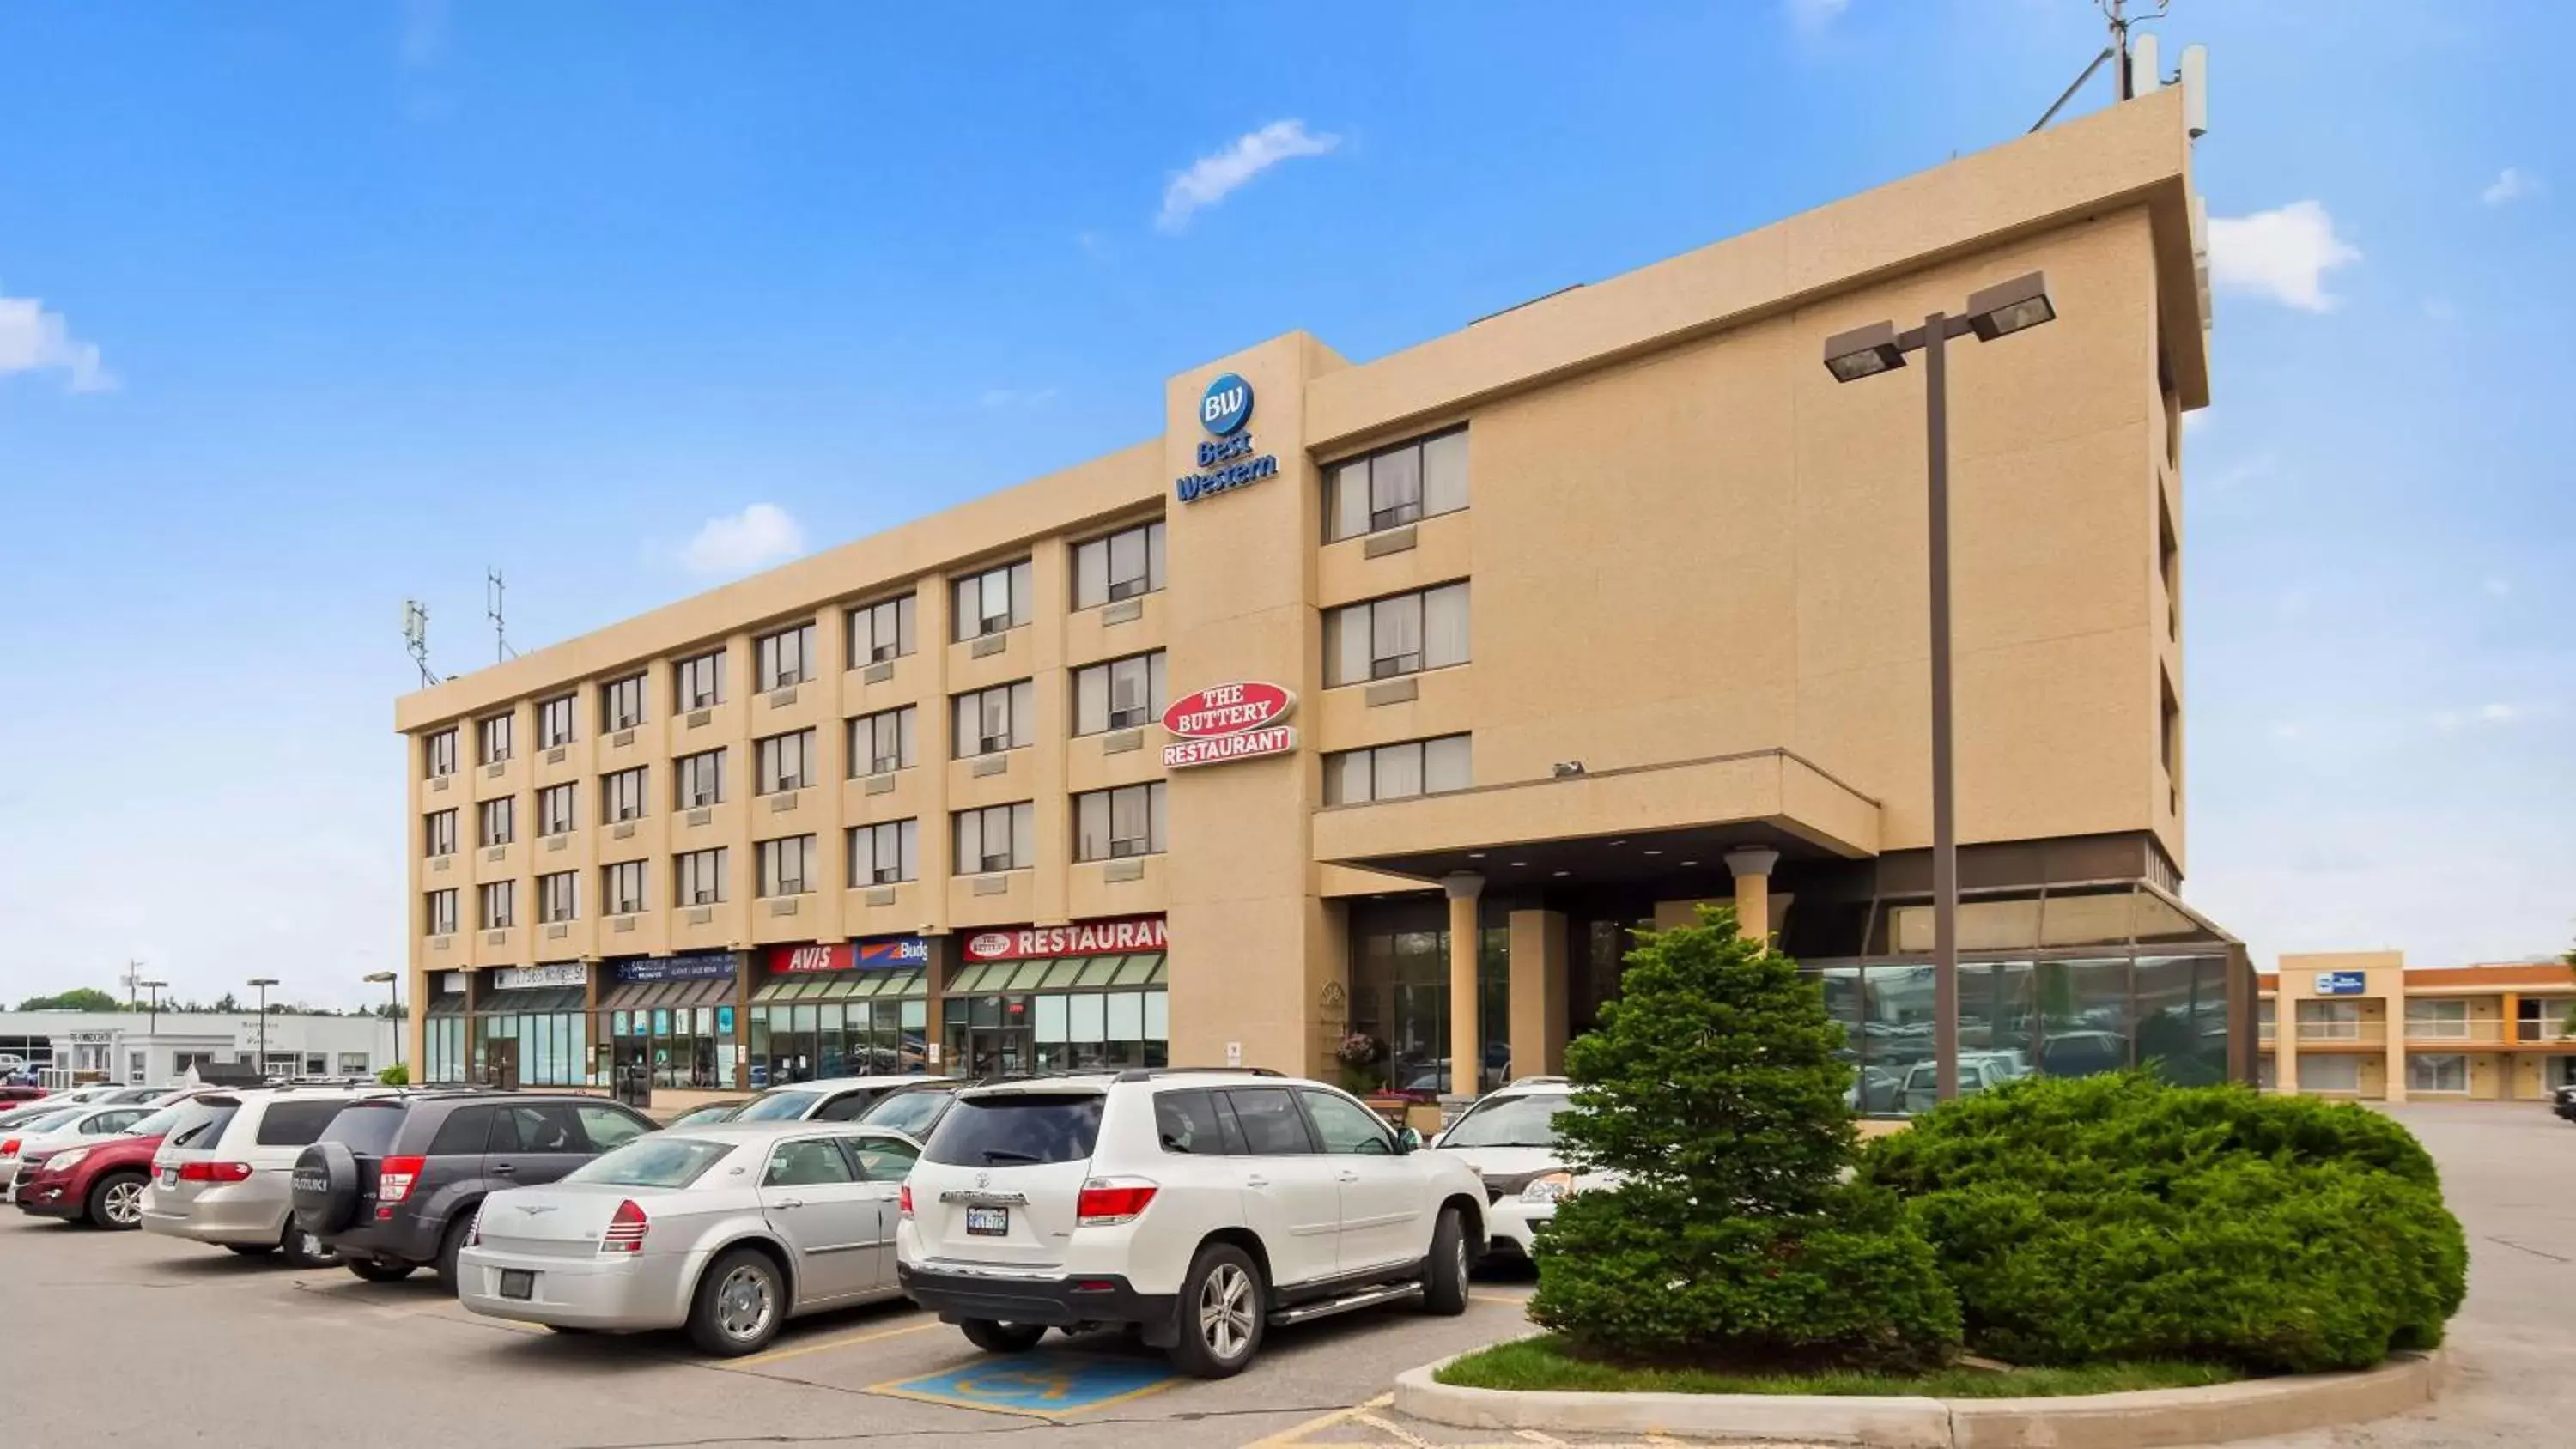 Property Building in Best Western Voyageur Place Hotel